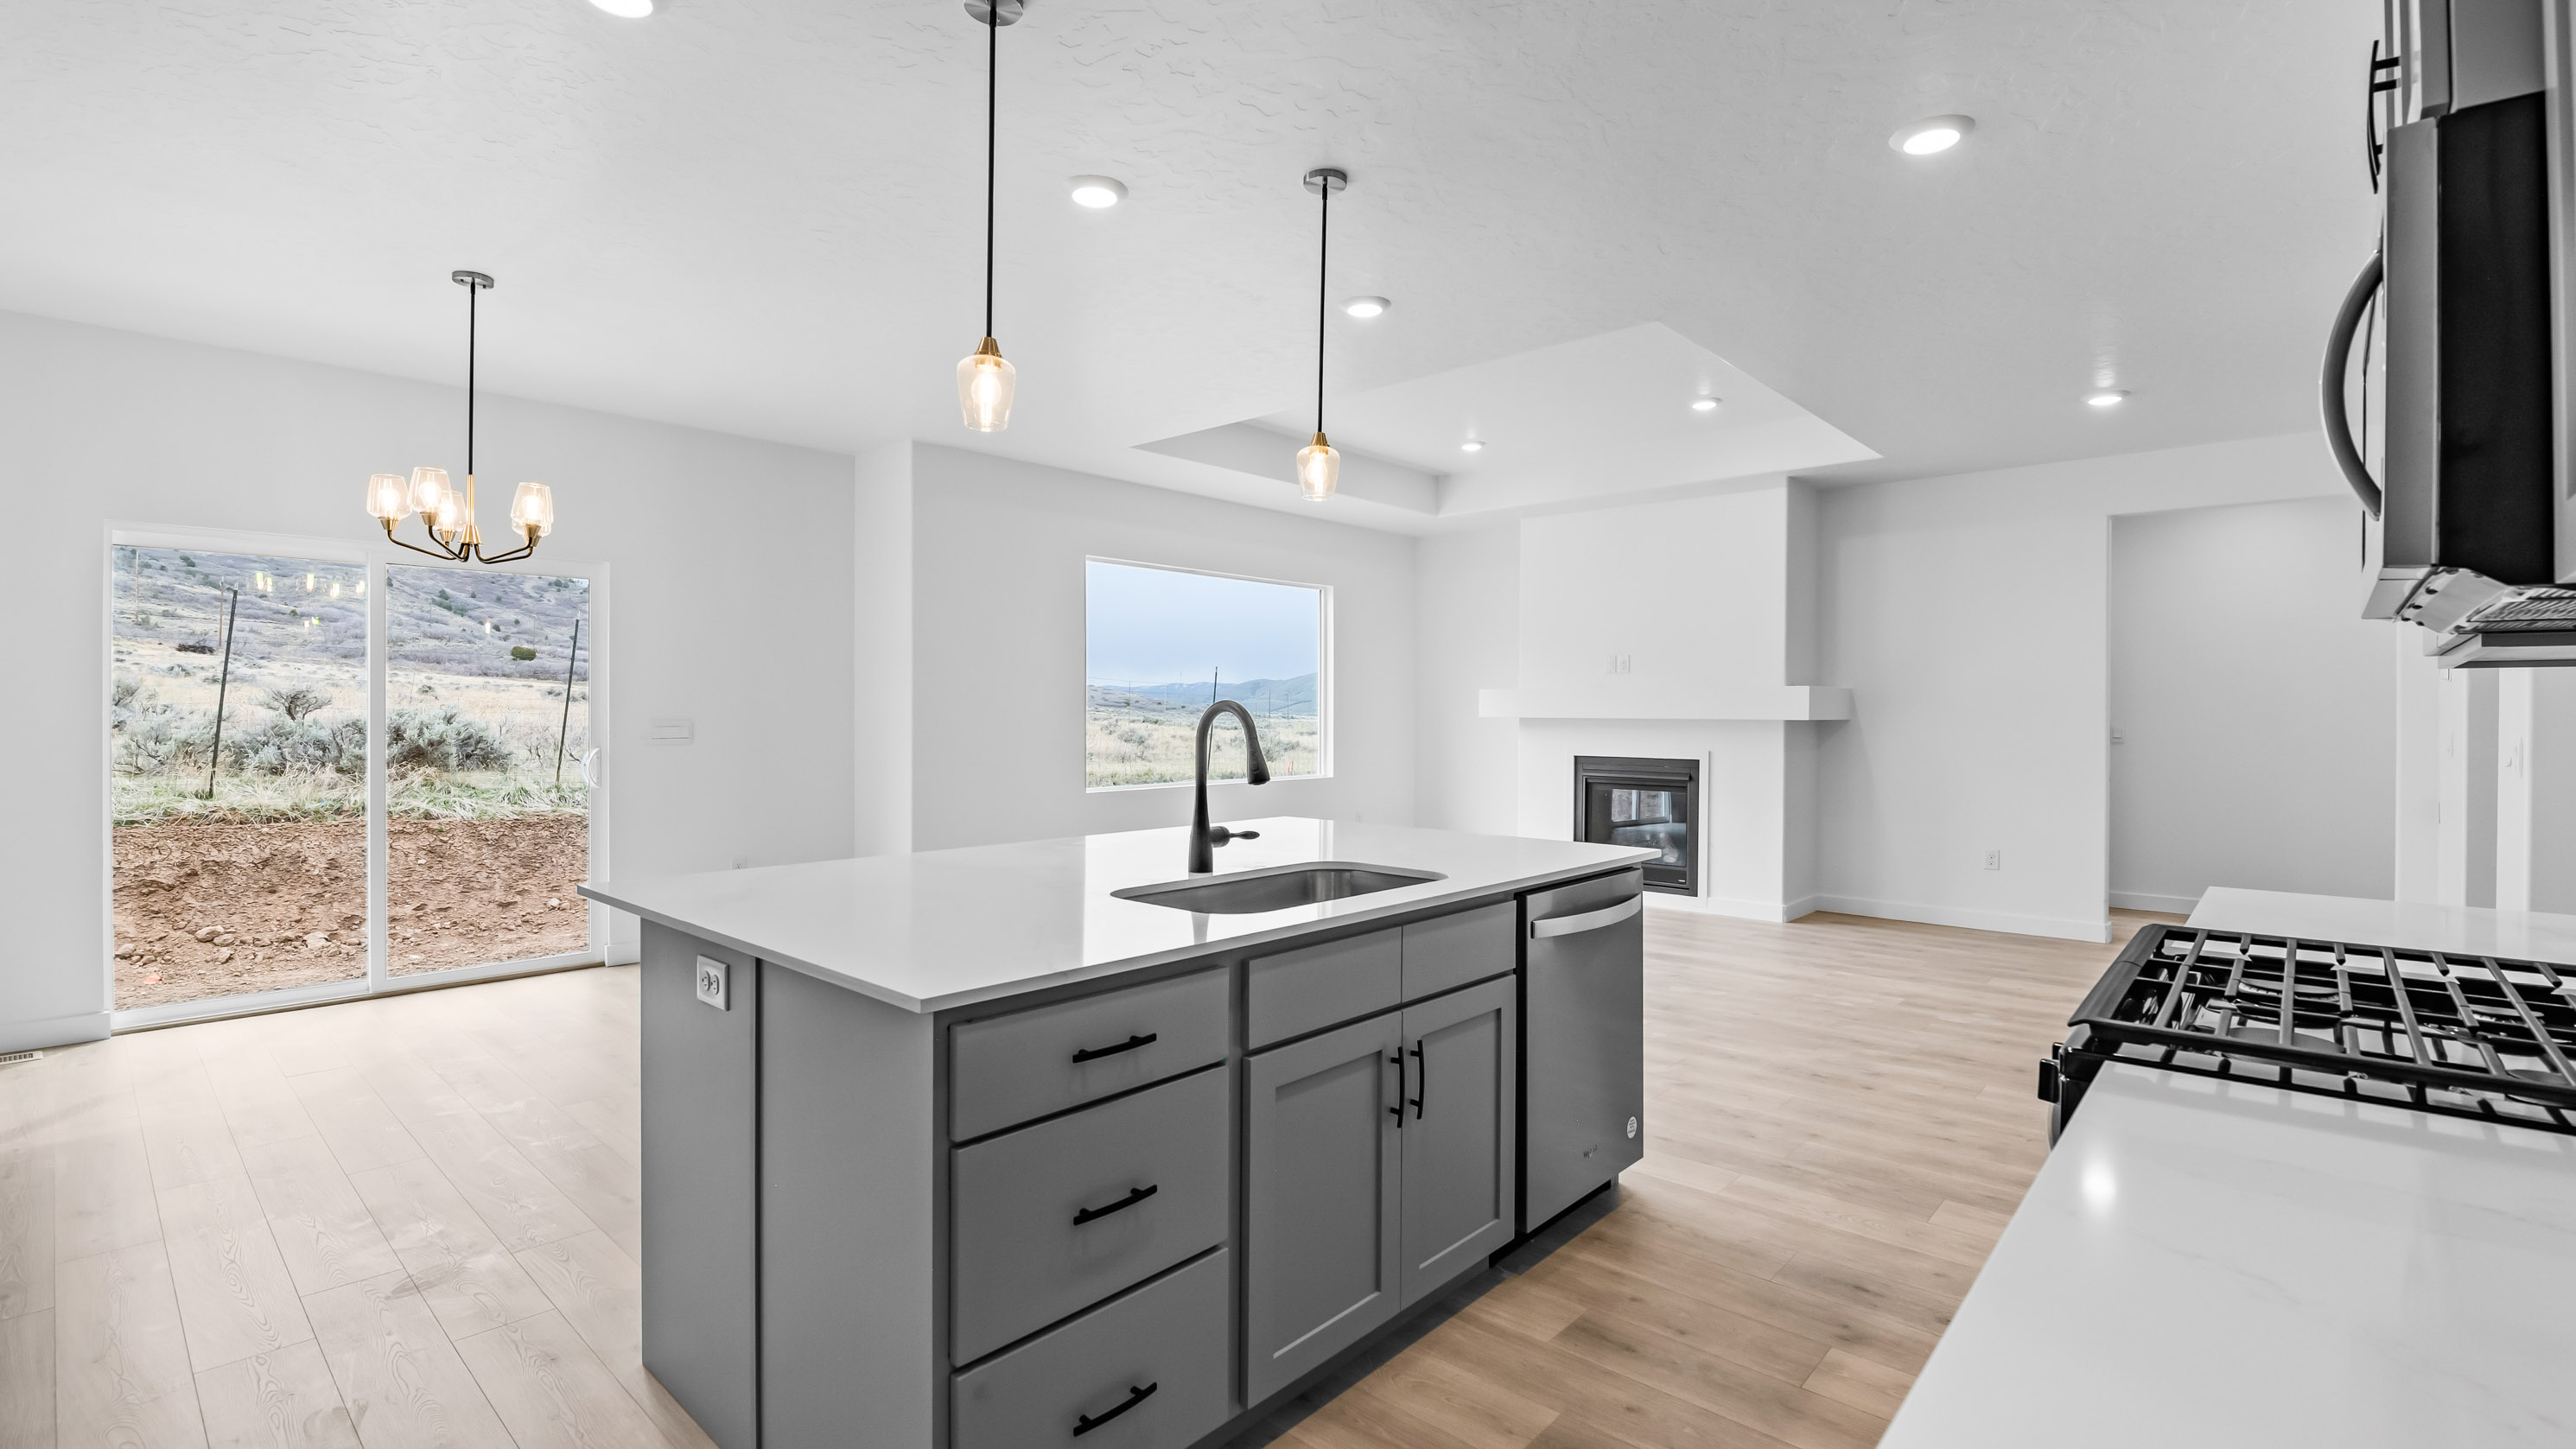 new builds in Lehi